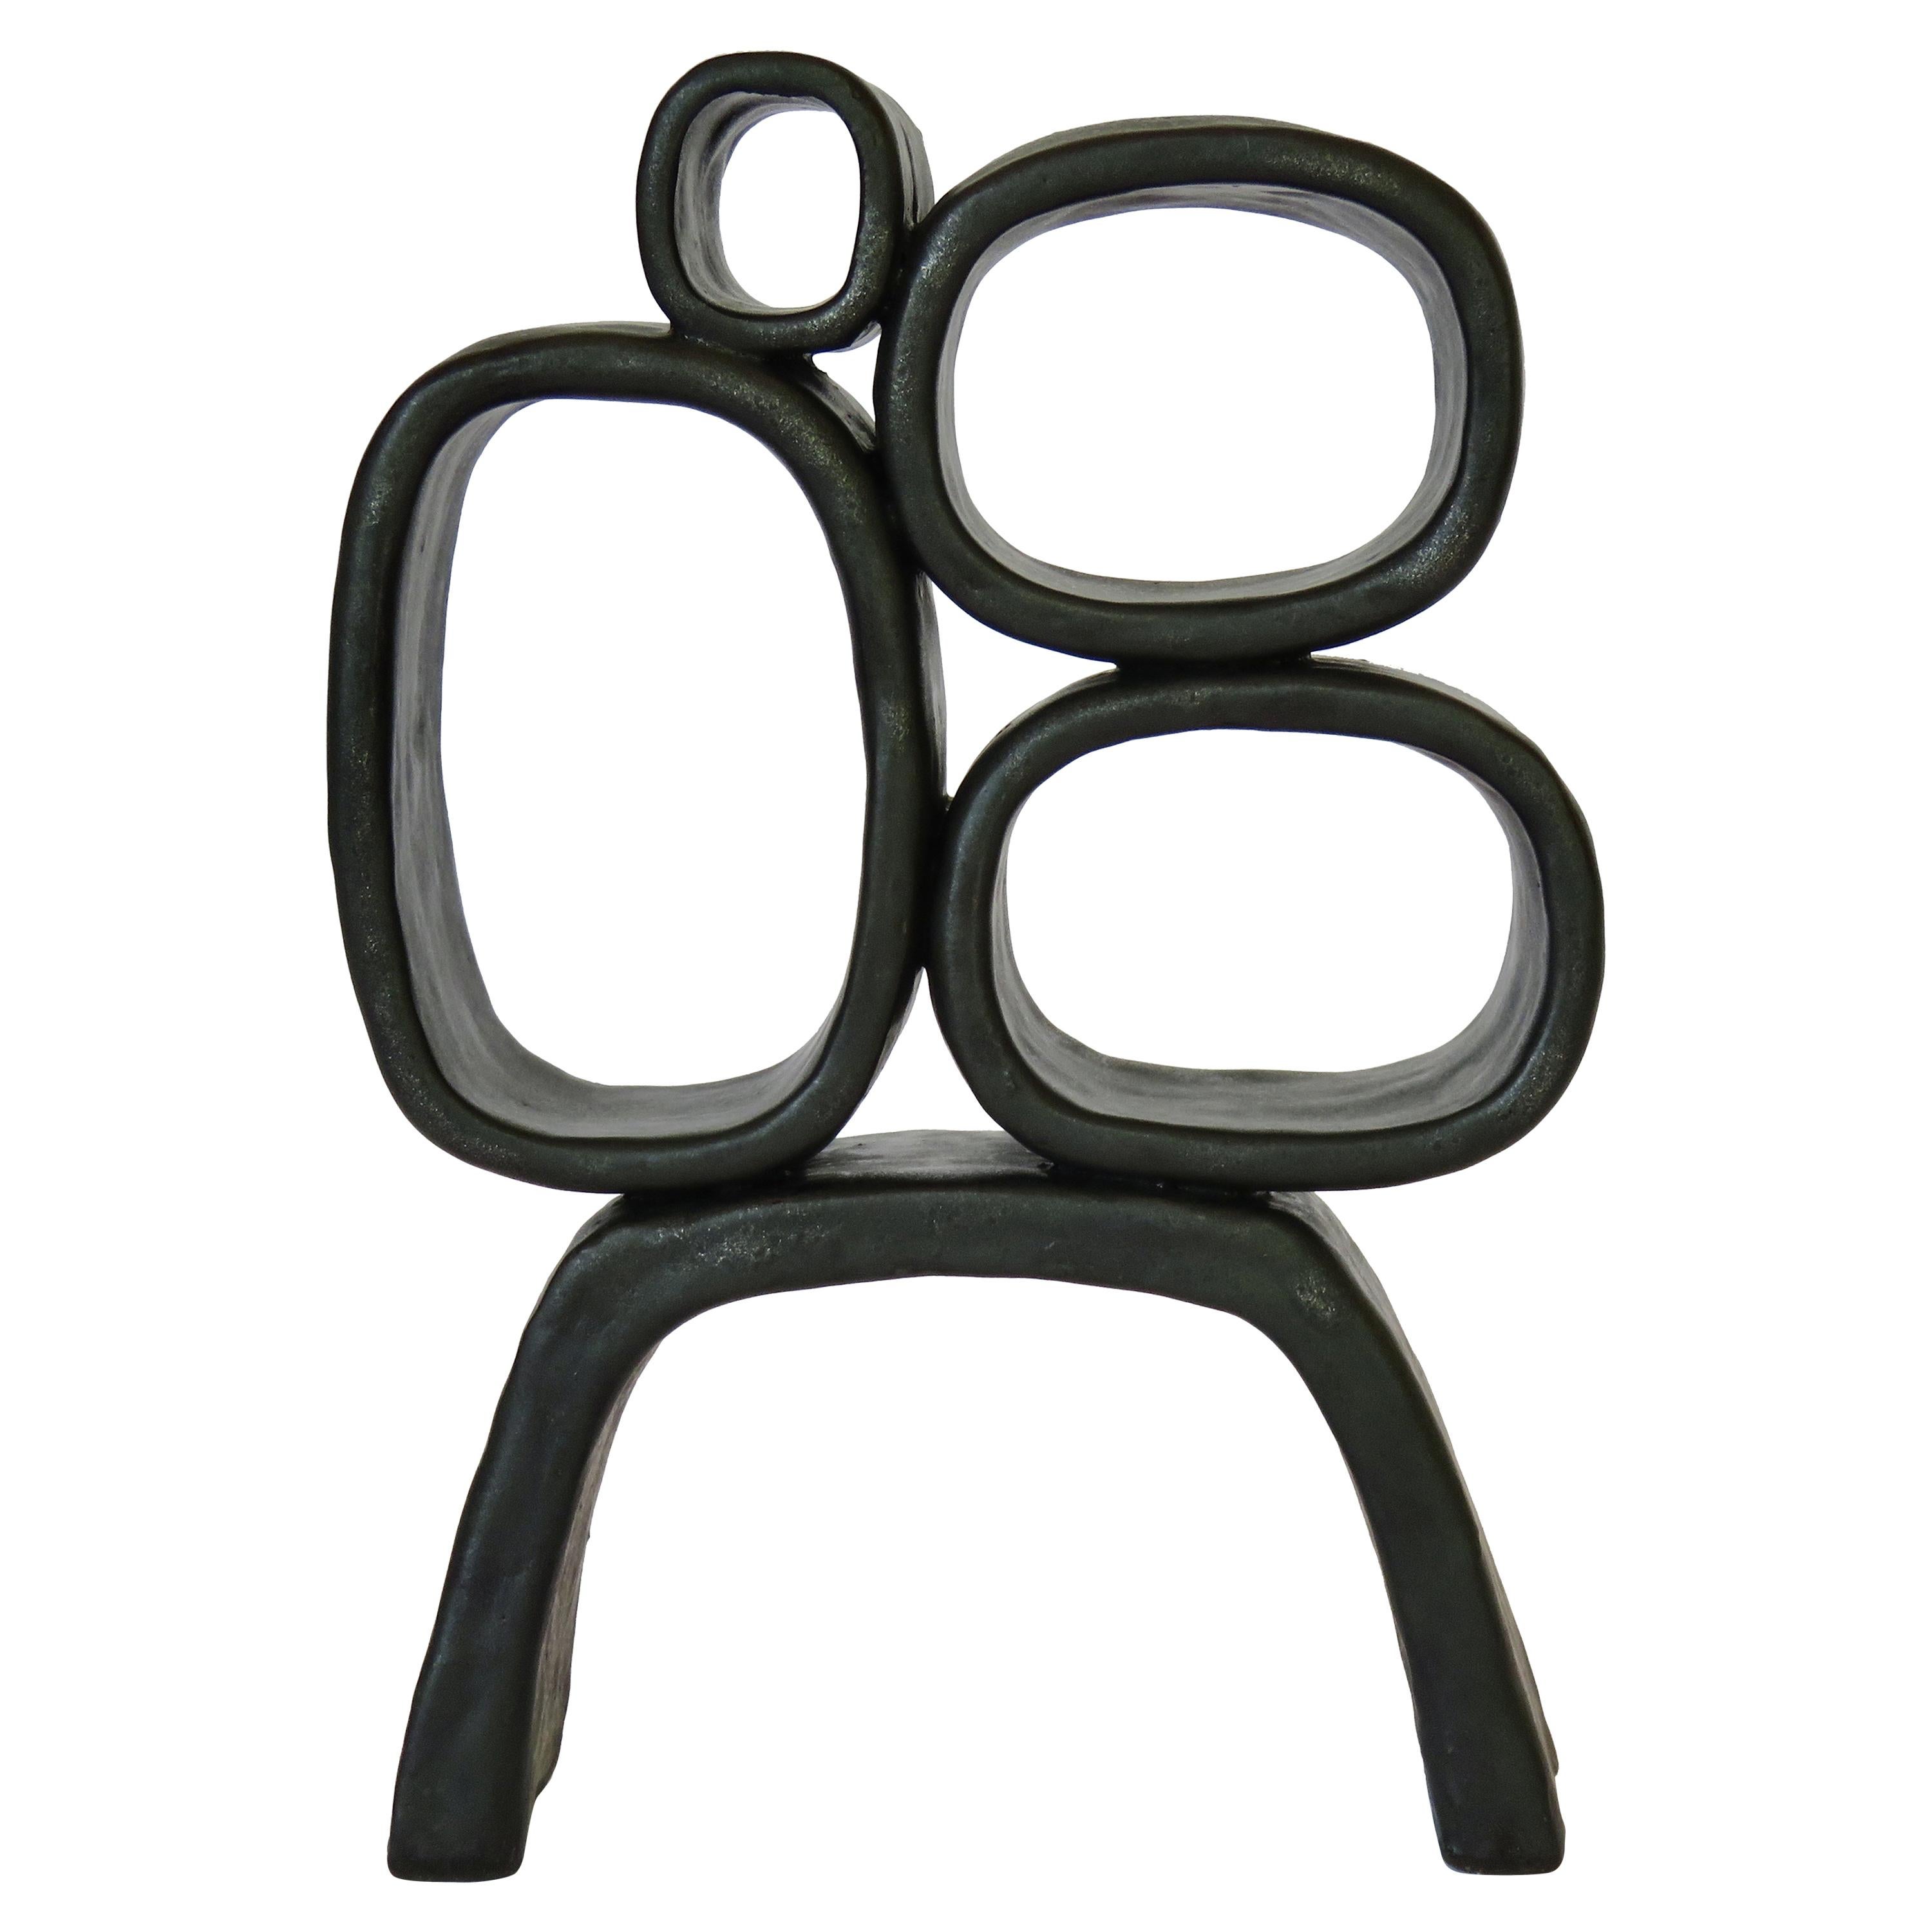 Metallic Black Hand-Built Ceramic Sculpture with Hollow Rings on Angled Legs